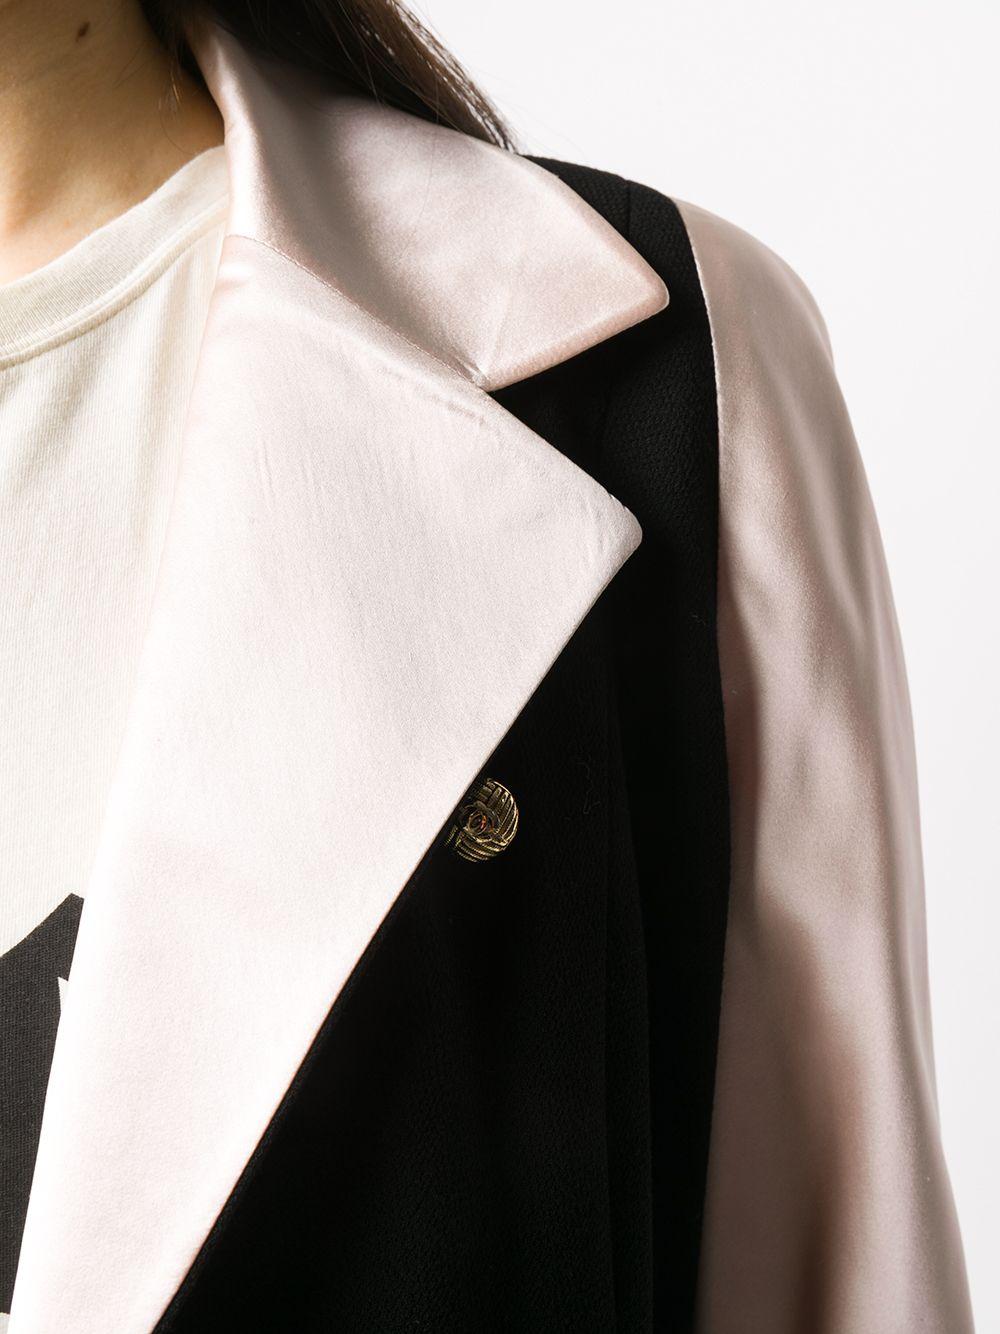 Meticulously crafted in France from a contrasting two-tone palette of pure black wool and pink silk, this sophisticated pre-loved skirt suit by Chanel gives a 90s-inspired twist to the brand's signature twinset. The blazer features peaked lapels, a